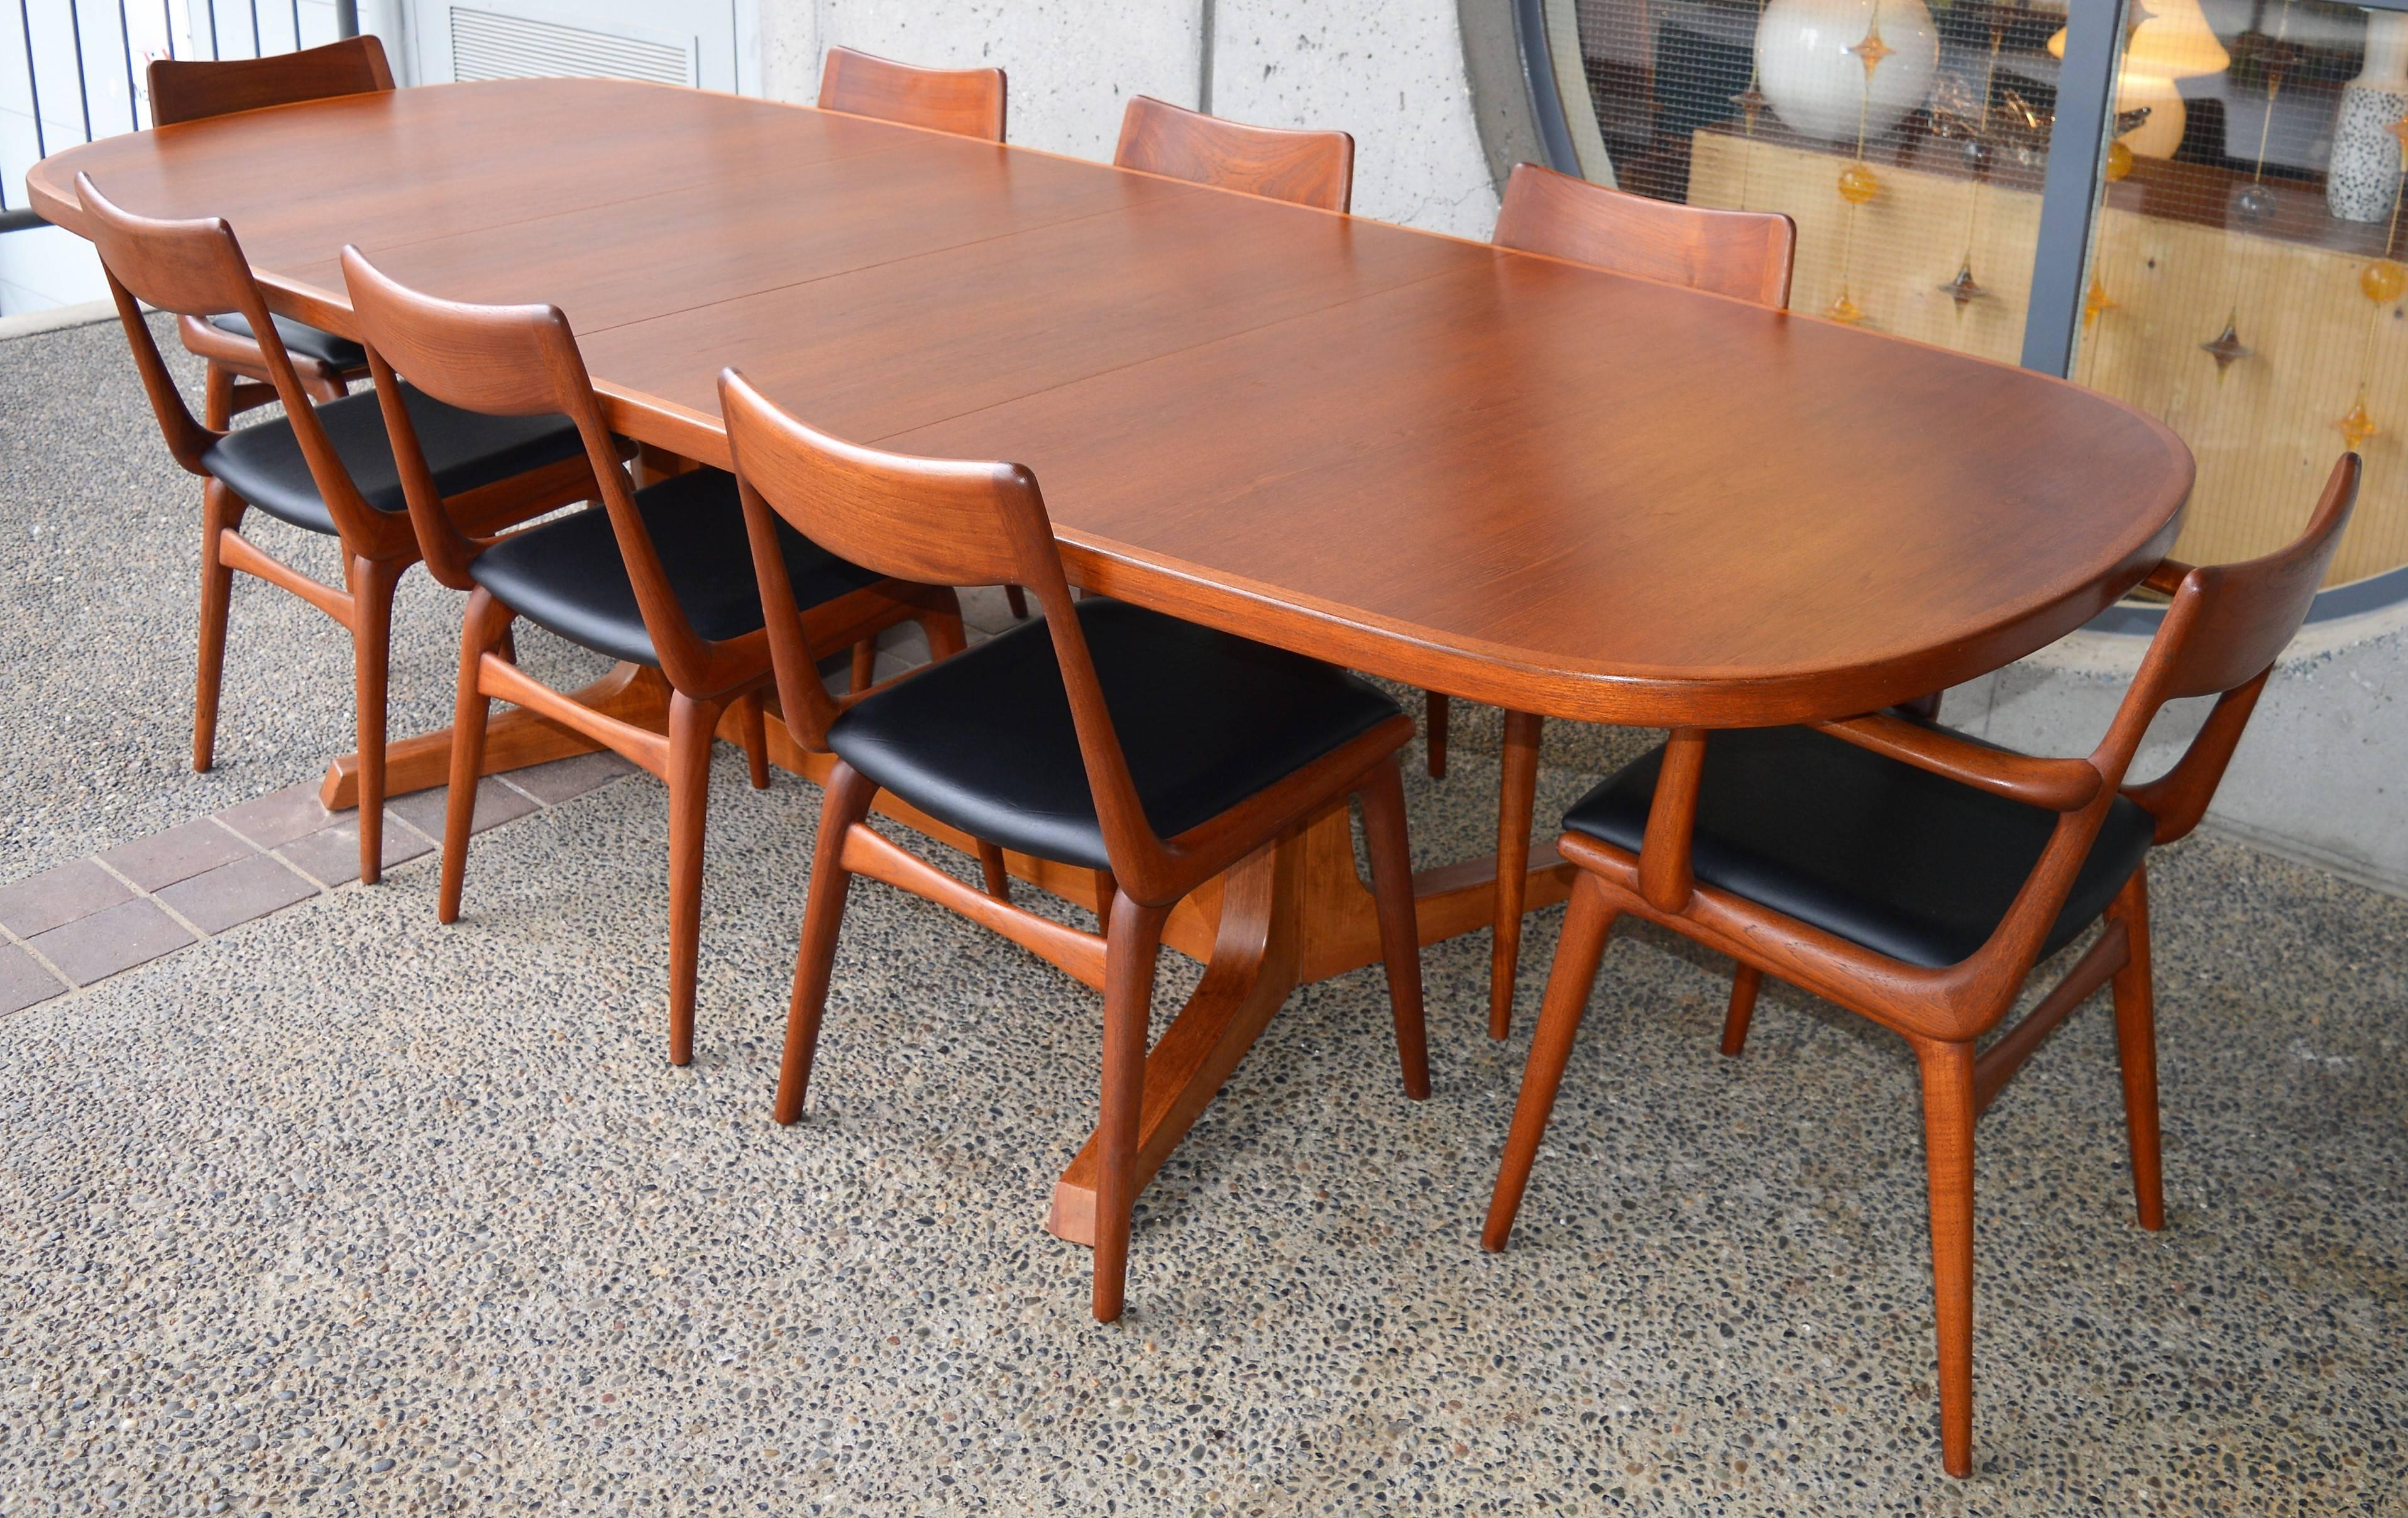 This stellar top quality teak dining table was designed by NO Moller for Gudme Mobelfabrik in the 1960s. The gorgeous crossed double pedestal base is a sculptural beauty, and the softly rounded oval table has fabulous proportions. This beauty